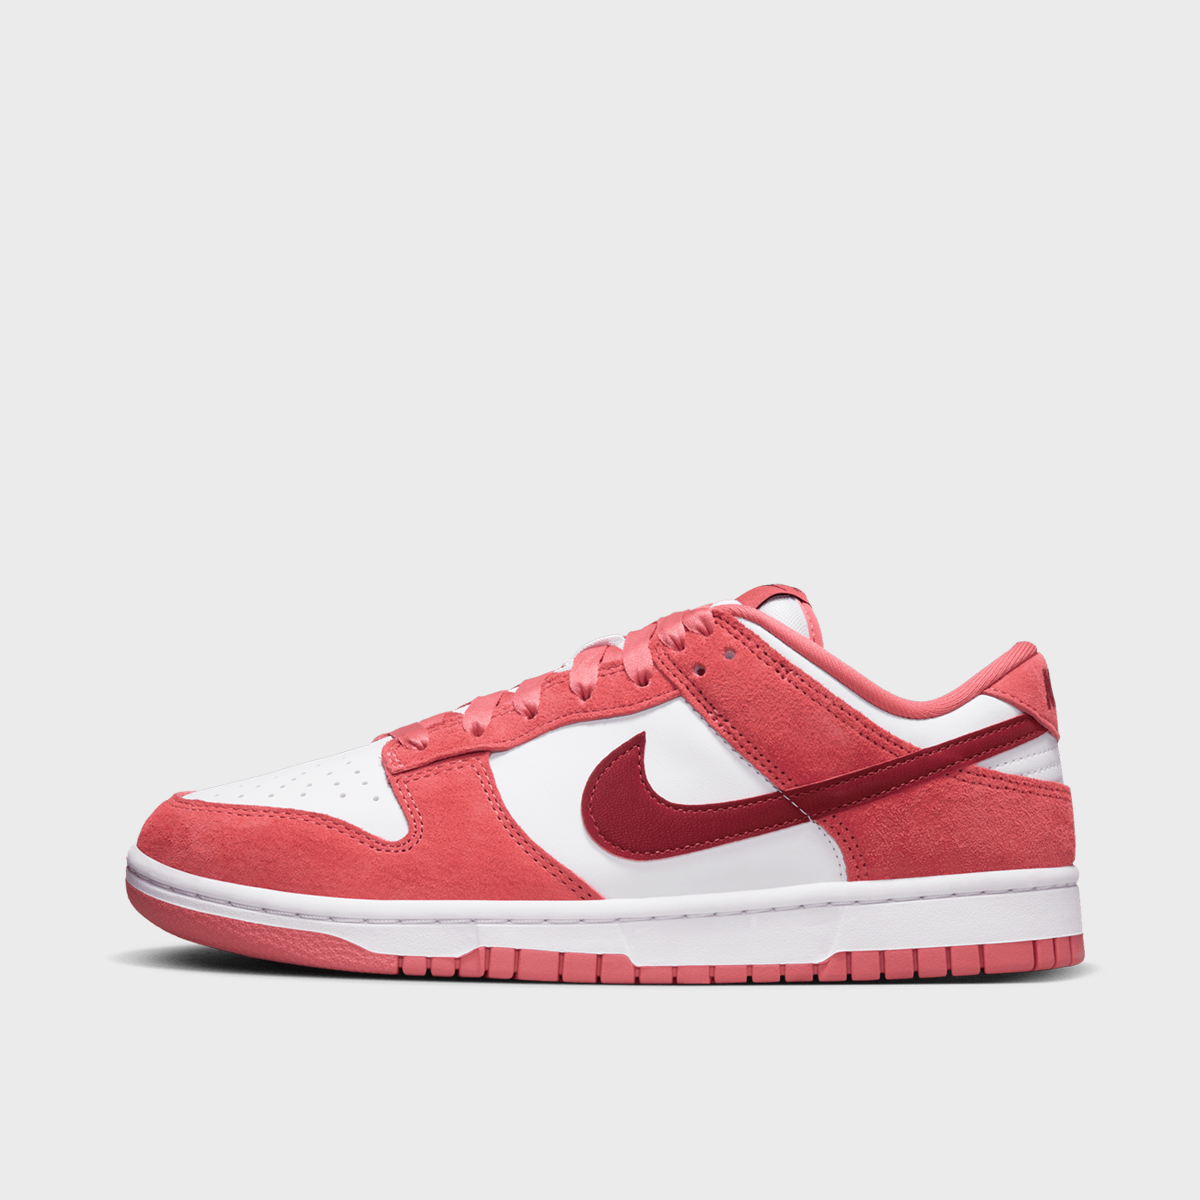 WMNS Dunk Low, NIKE, Footwear, white/team red/adobe/dragon red, taille: 40.5